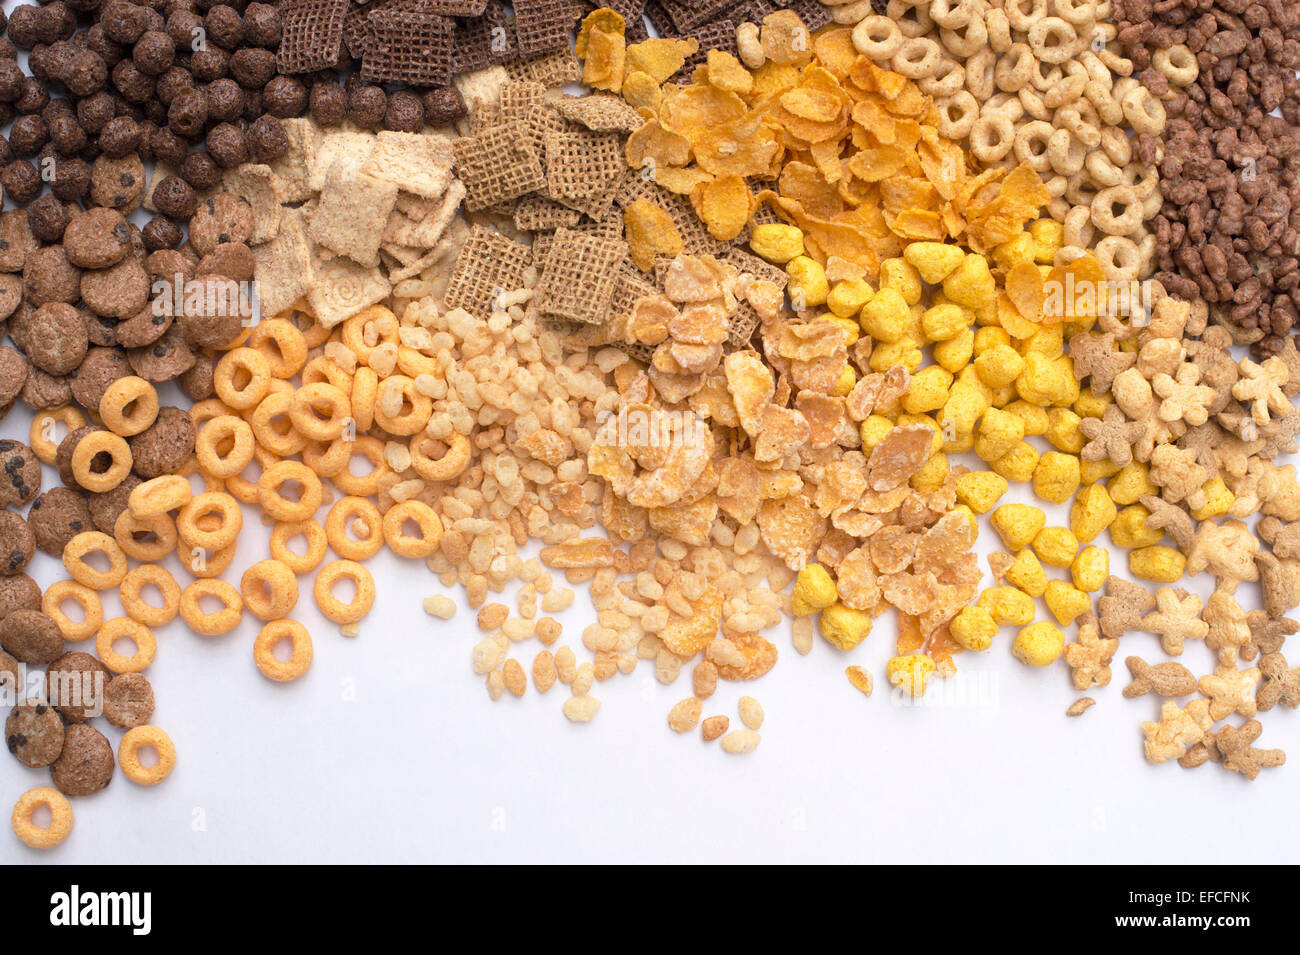 Assorted childrens breakfast cereals on white background Stock Photo